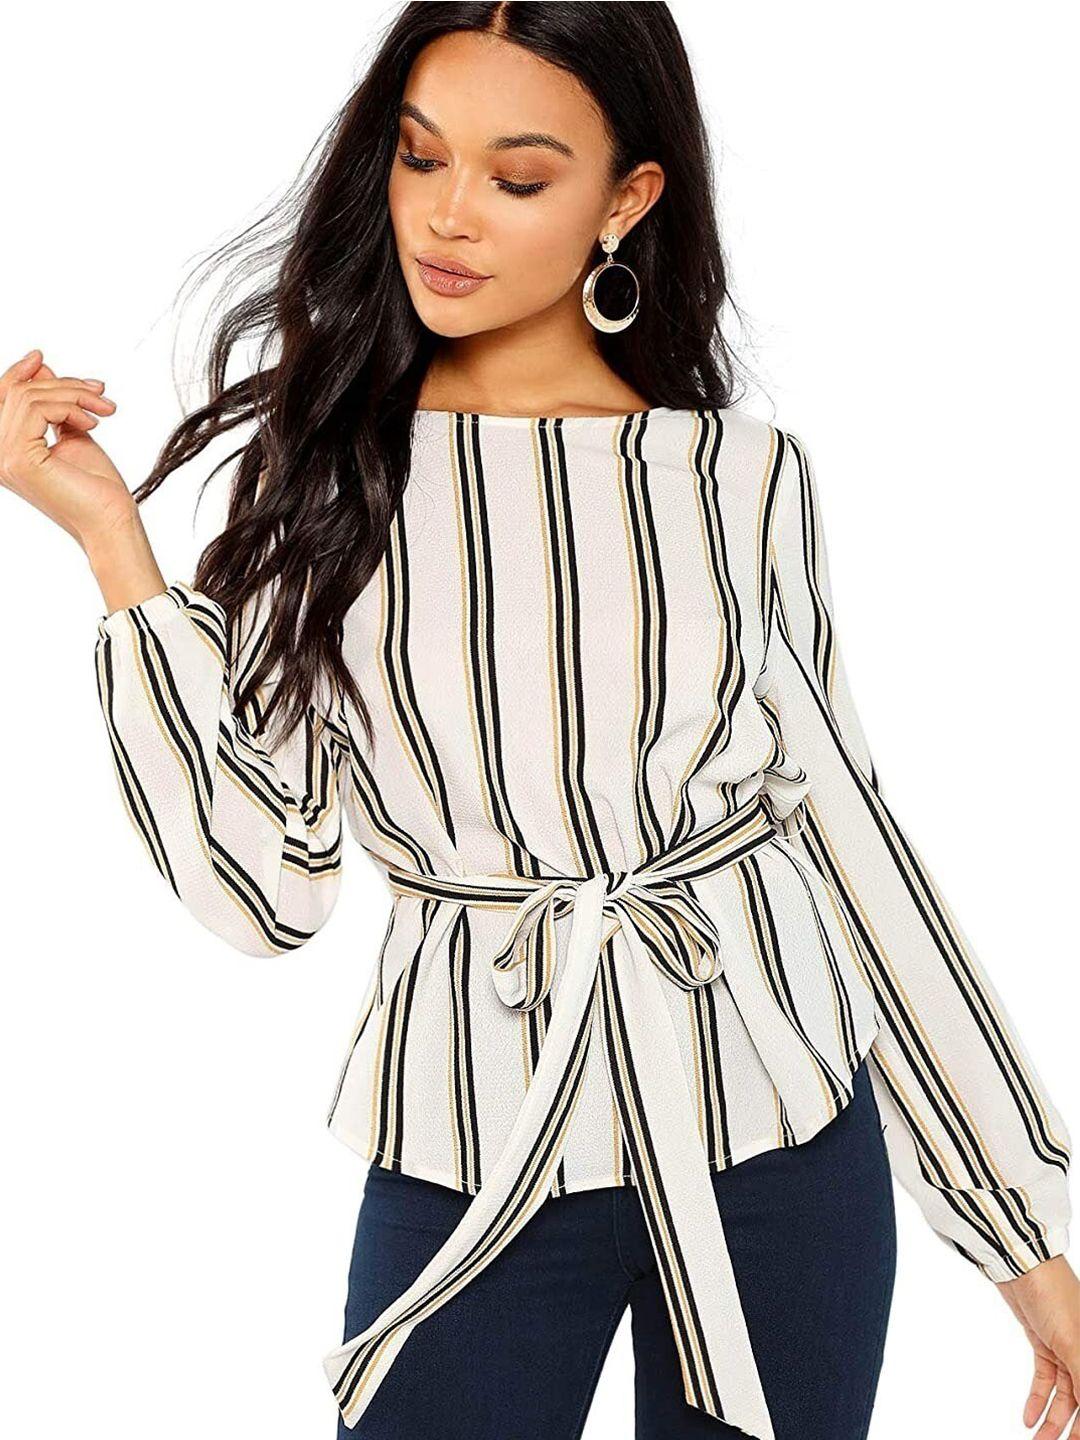 slyck-vertical-striped-puff-sleeves-top